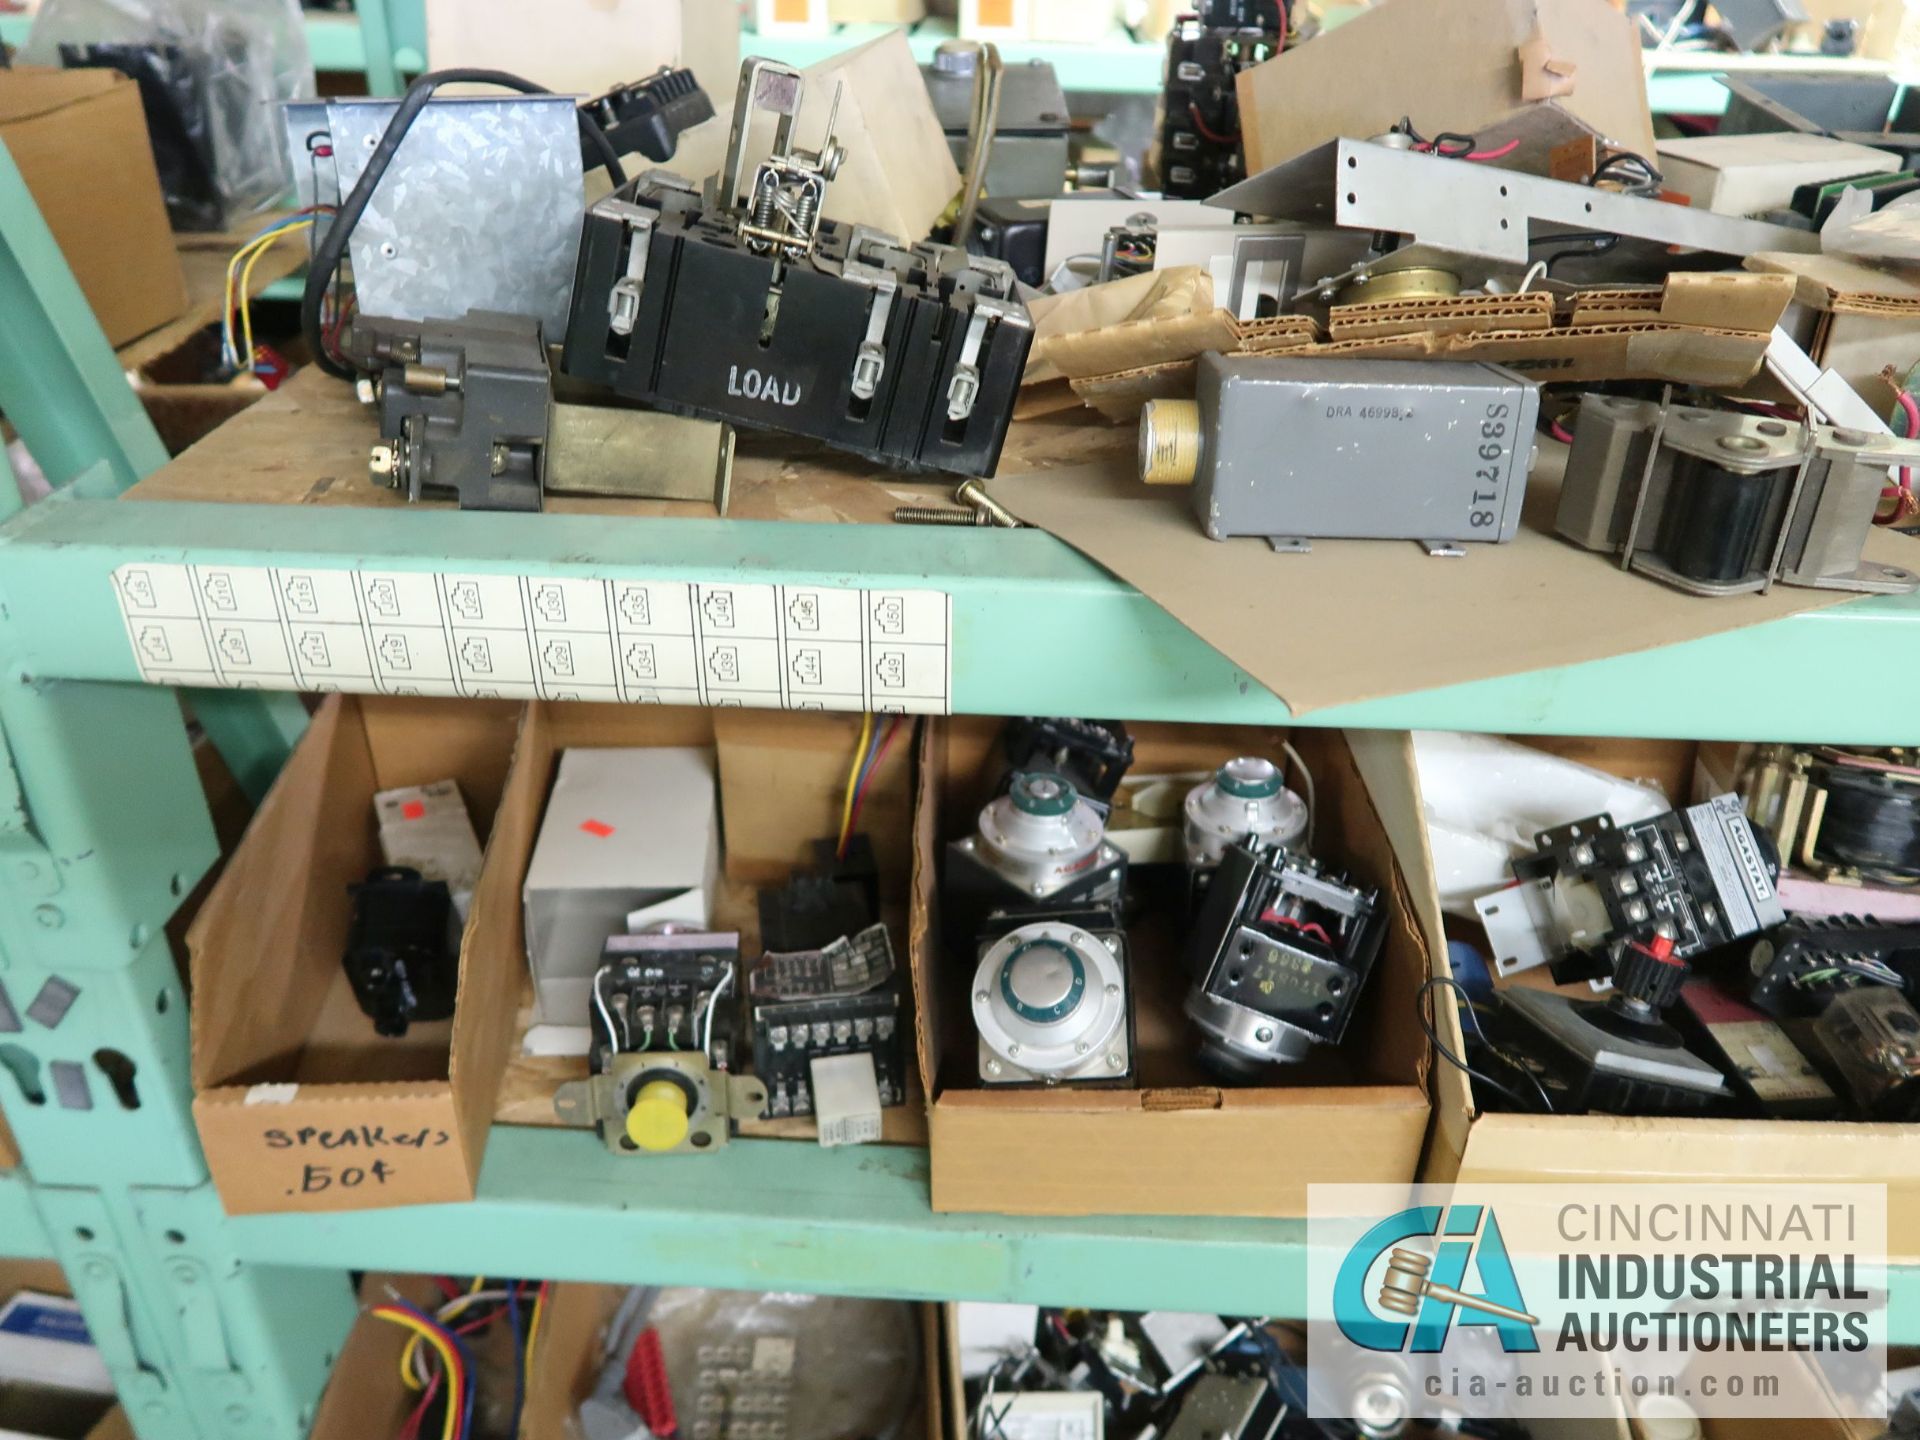 (LOT) CONTENTS OF (3) SECTION GREEN RACK - ALLEN BRADLEY ELECTRICAL COMPONENTS, INDUSTRIAL - Image 15 of 25